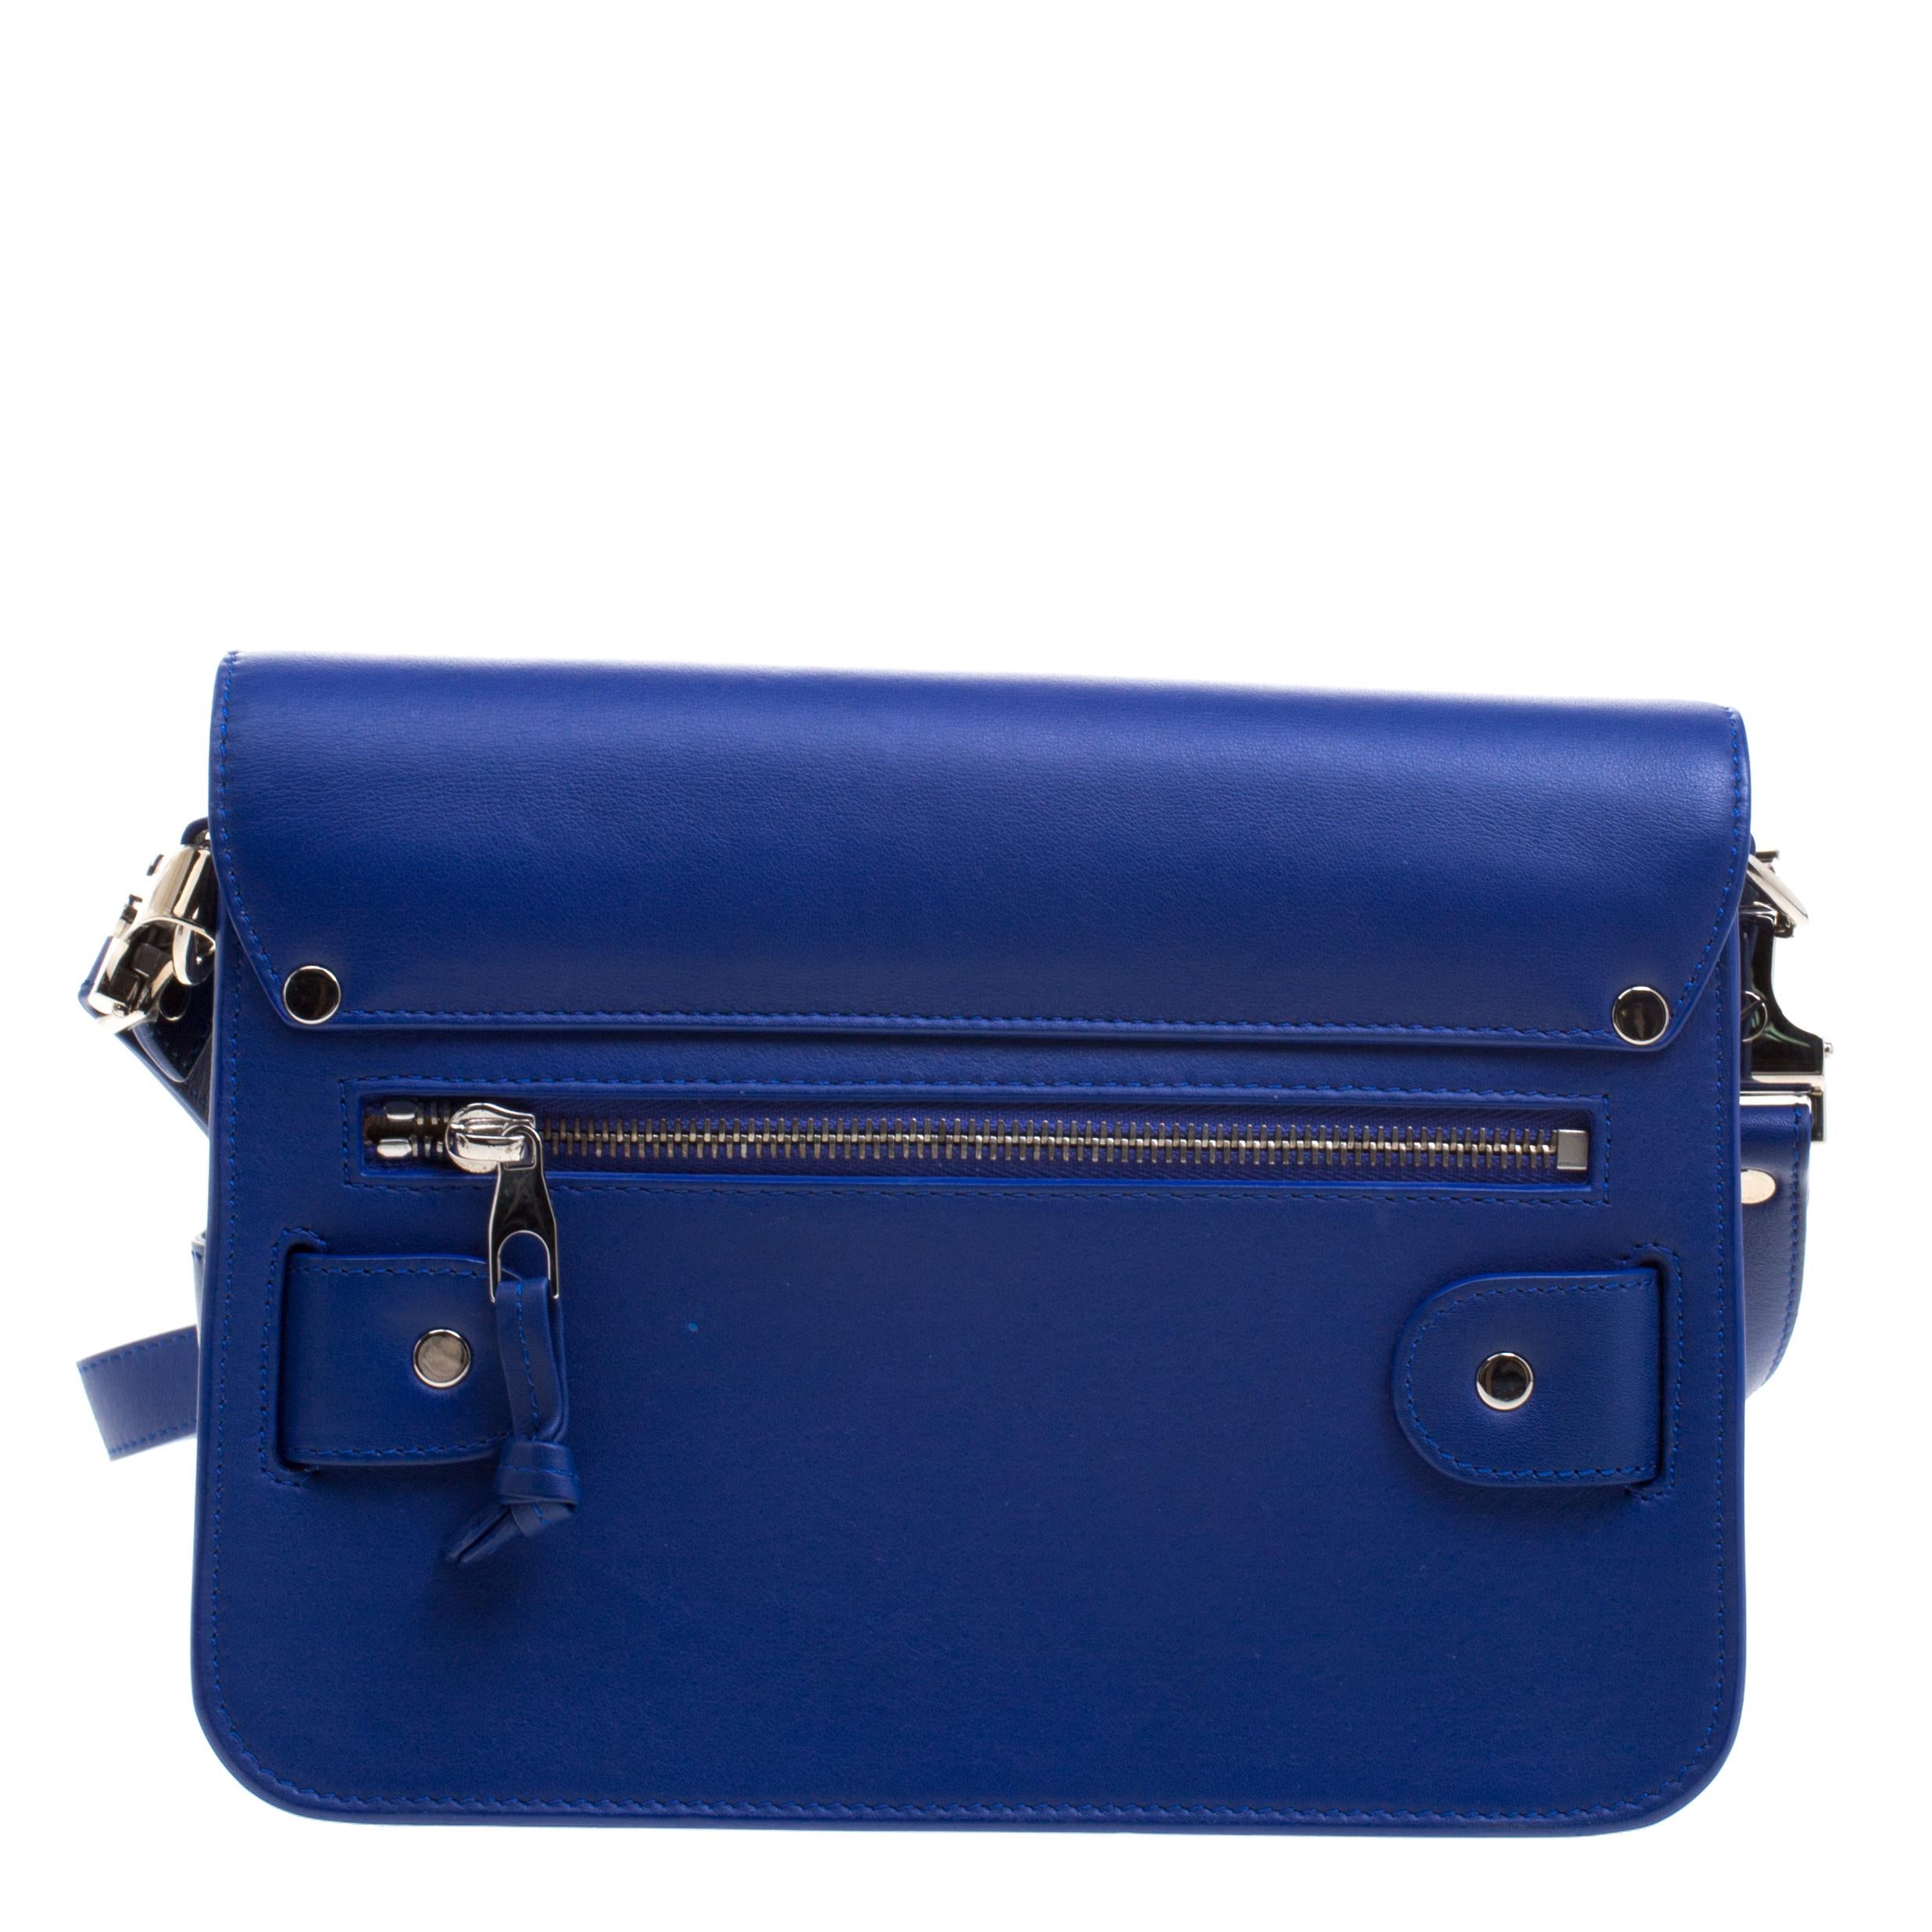 This stylish Classic PS11 shoulder bag from Proenza Schouler is sure to grab attention! Crafted from blue leather the bag comes with a removable shoulder strap and can be used as a clutch. The interior is fabric lined and sized perfectly to hold